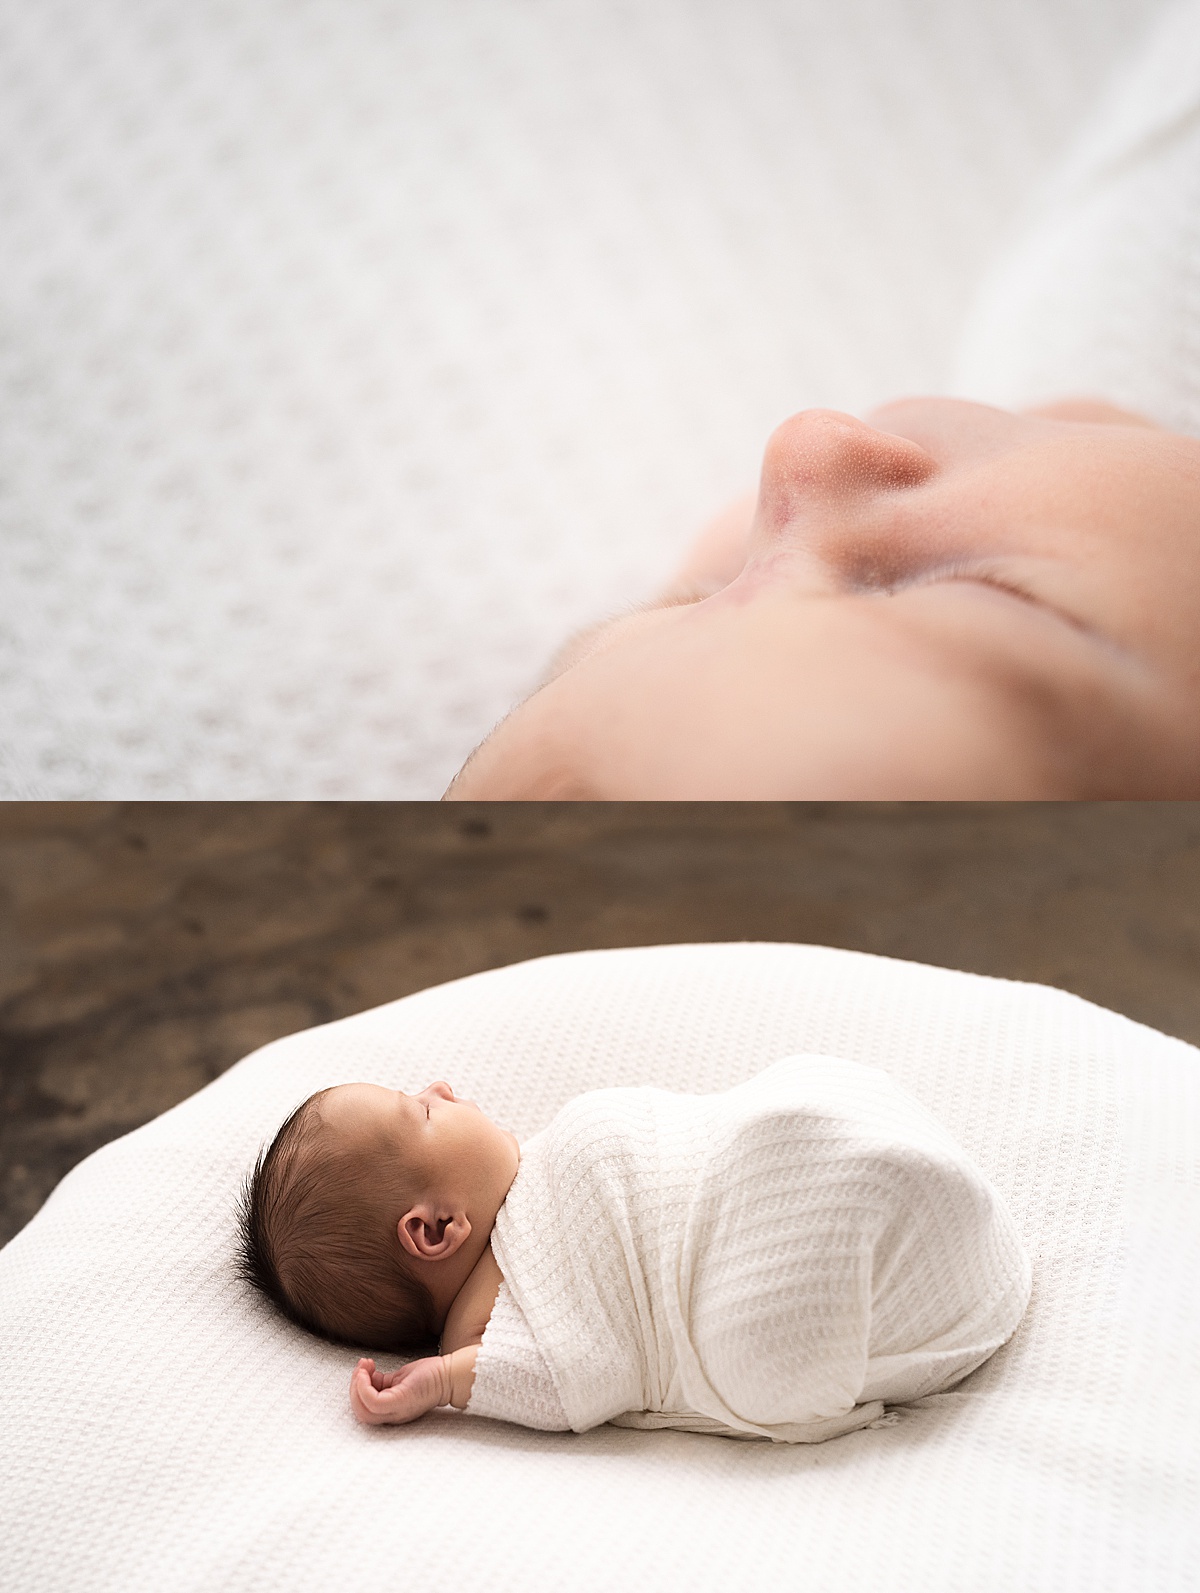 photography newborn details of eyelashes and sleeping wrapped in ivory